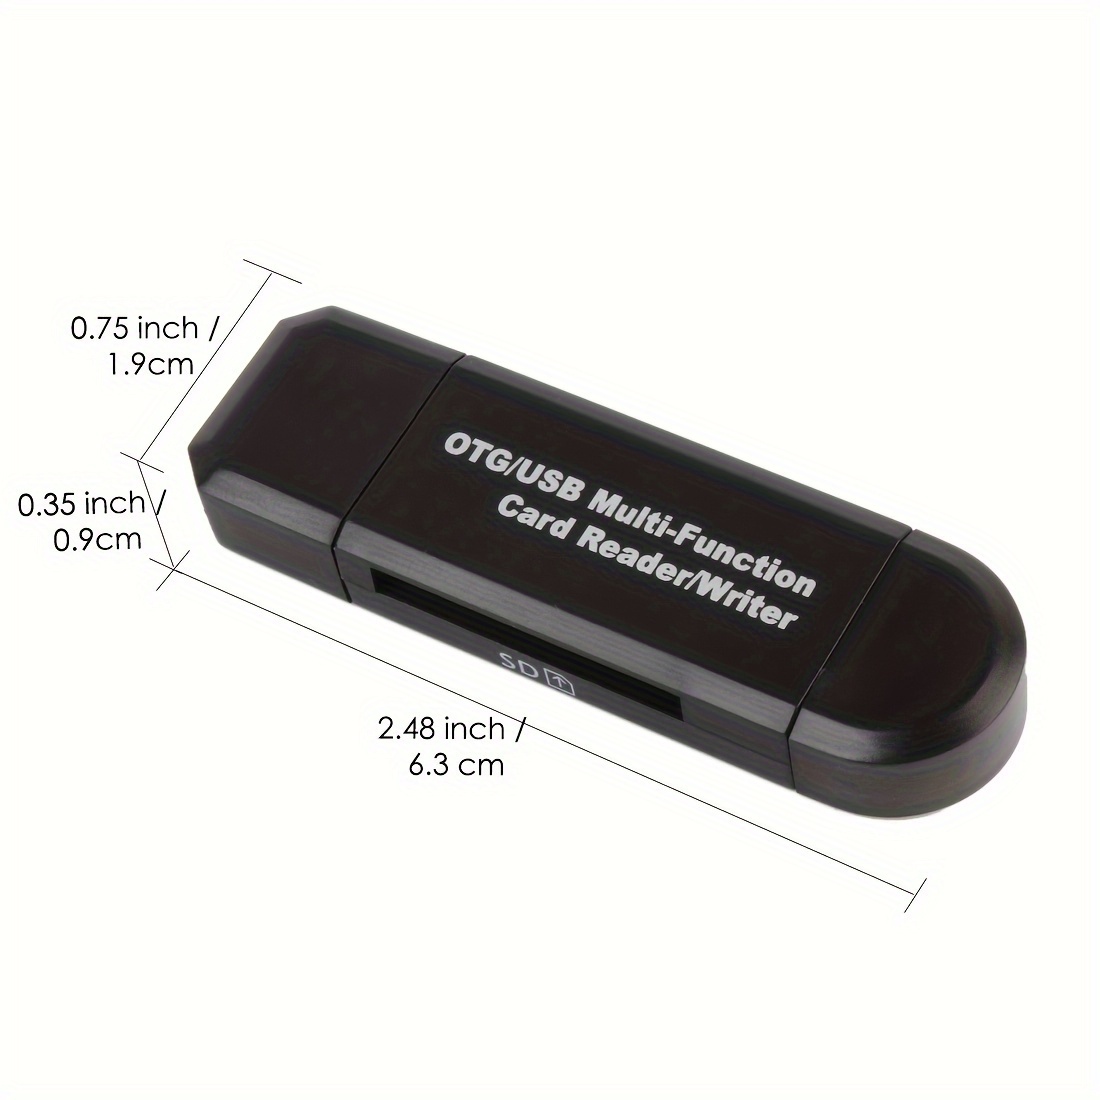 Micro USB OTG to USB 2.0 Adapter SD/Micro SD Card Reader With